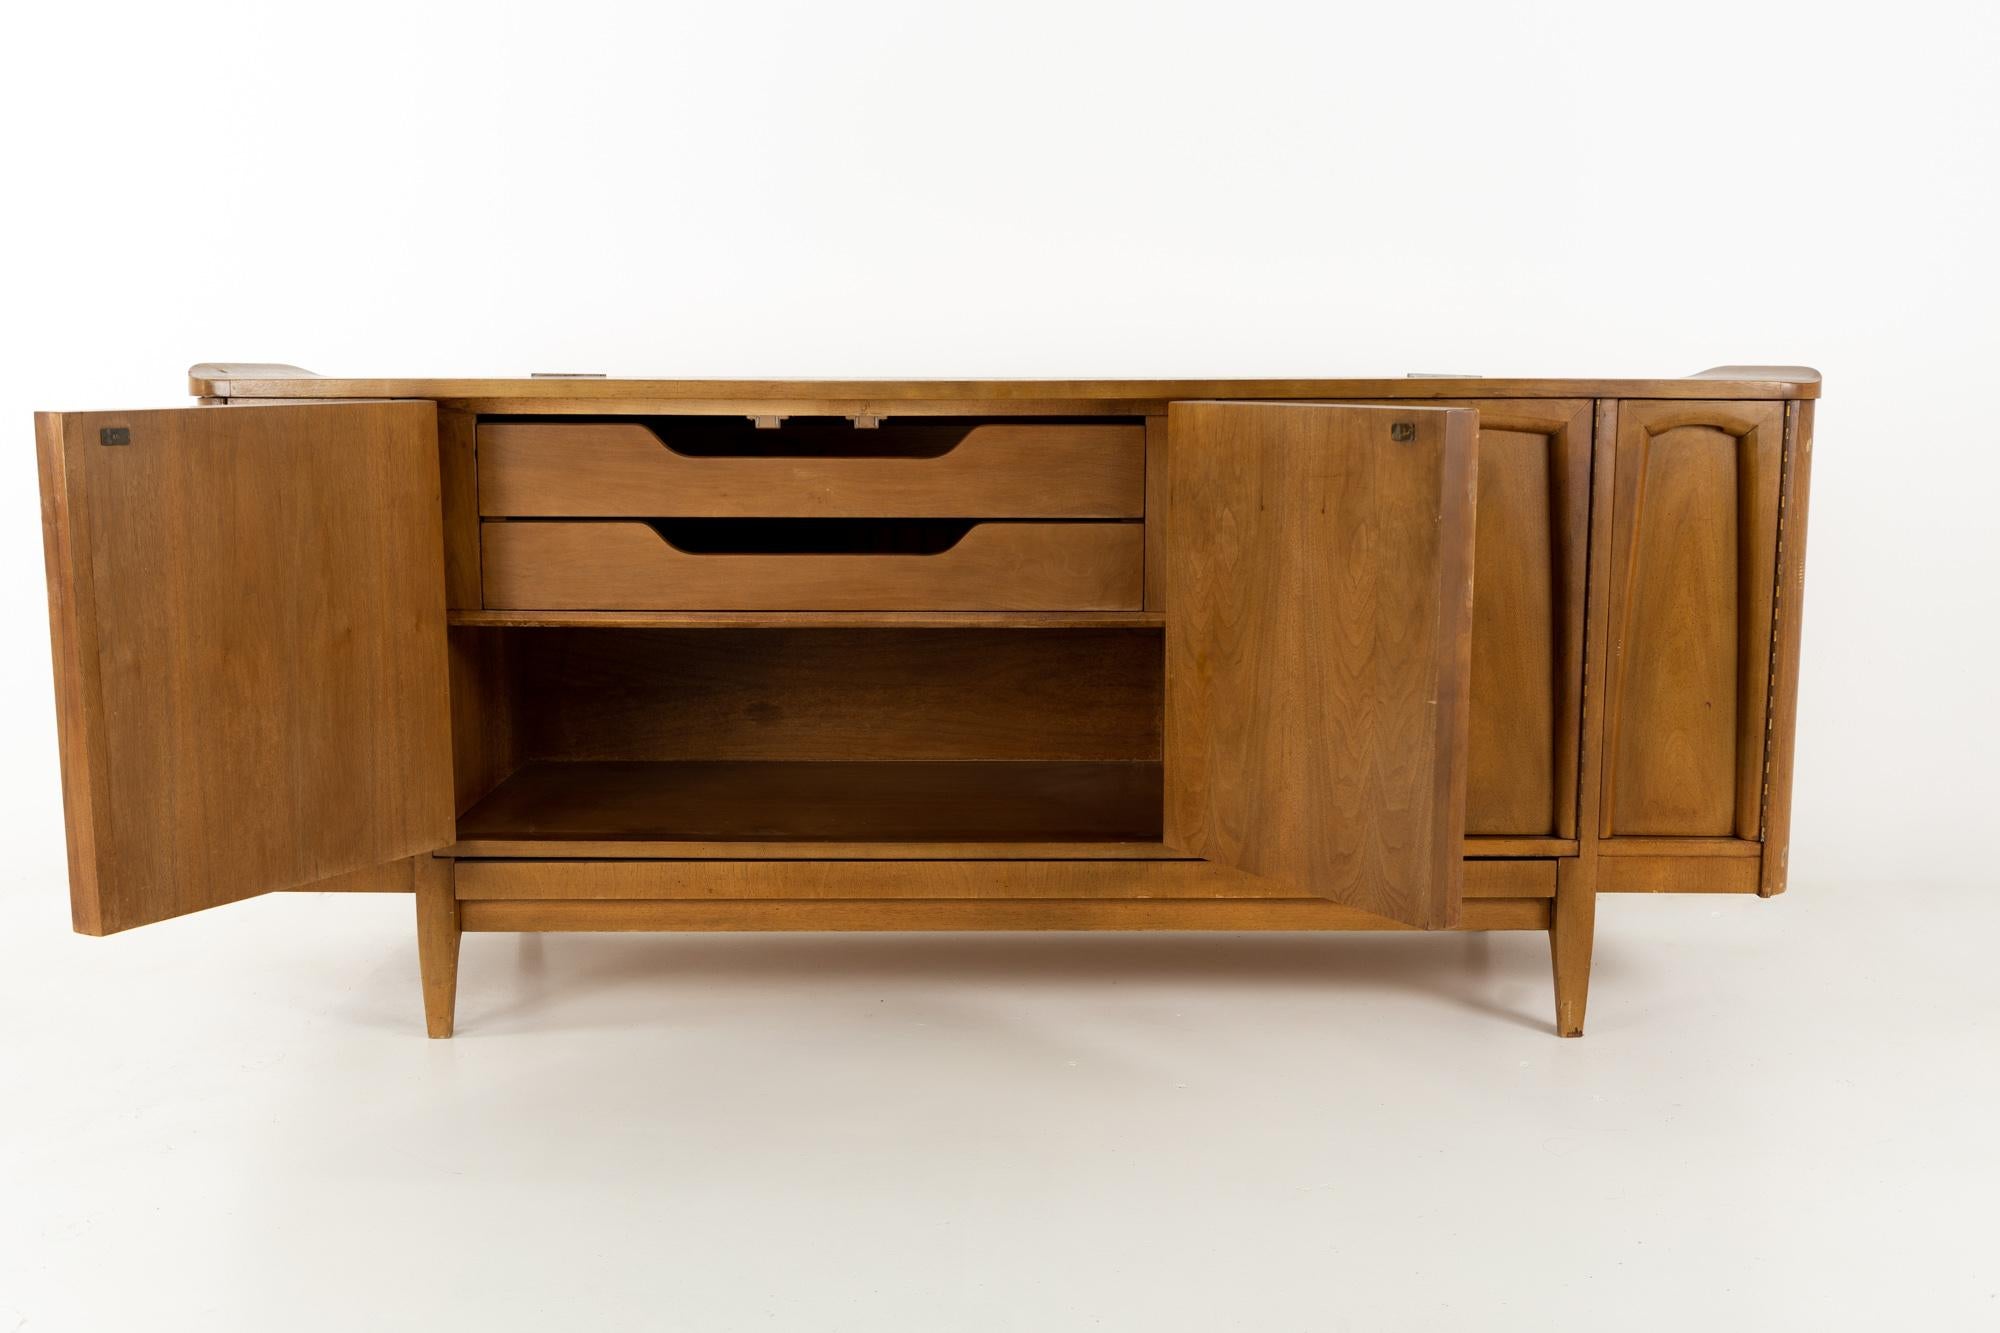 American of Martinsville Mid Century walnut sideboard buffet credenza
This piece is 74 wide x 19.25 deep x 30.75 inches high

This price includes getting this piece in what we call restored vintage condition. That means the piece is permanently